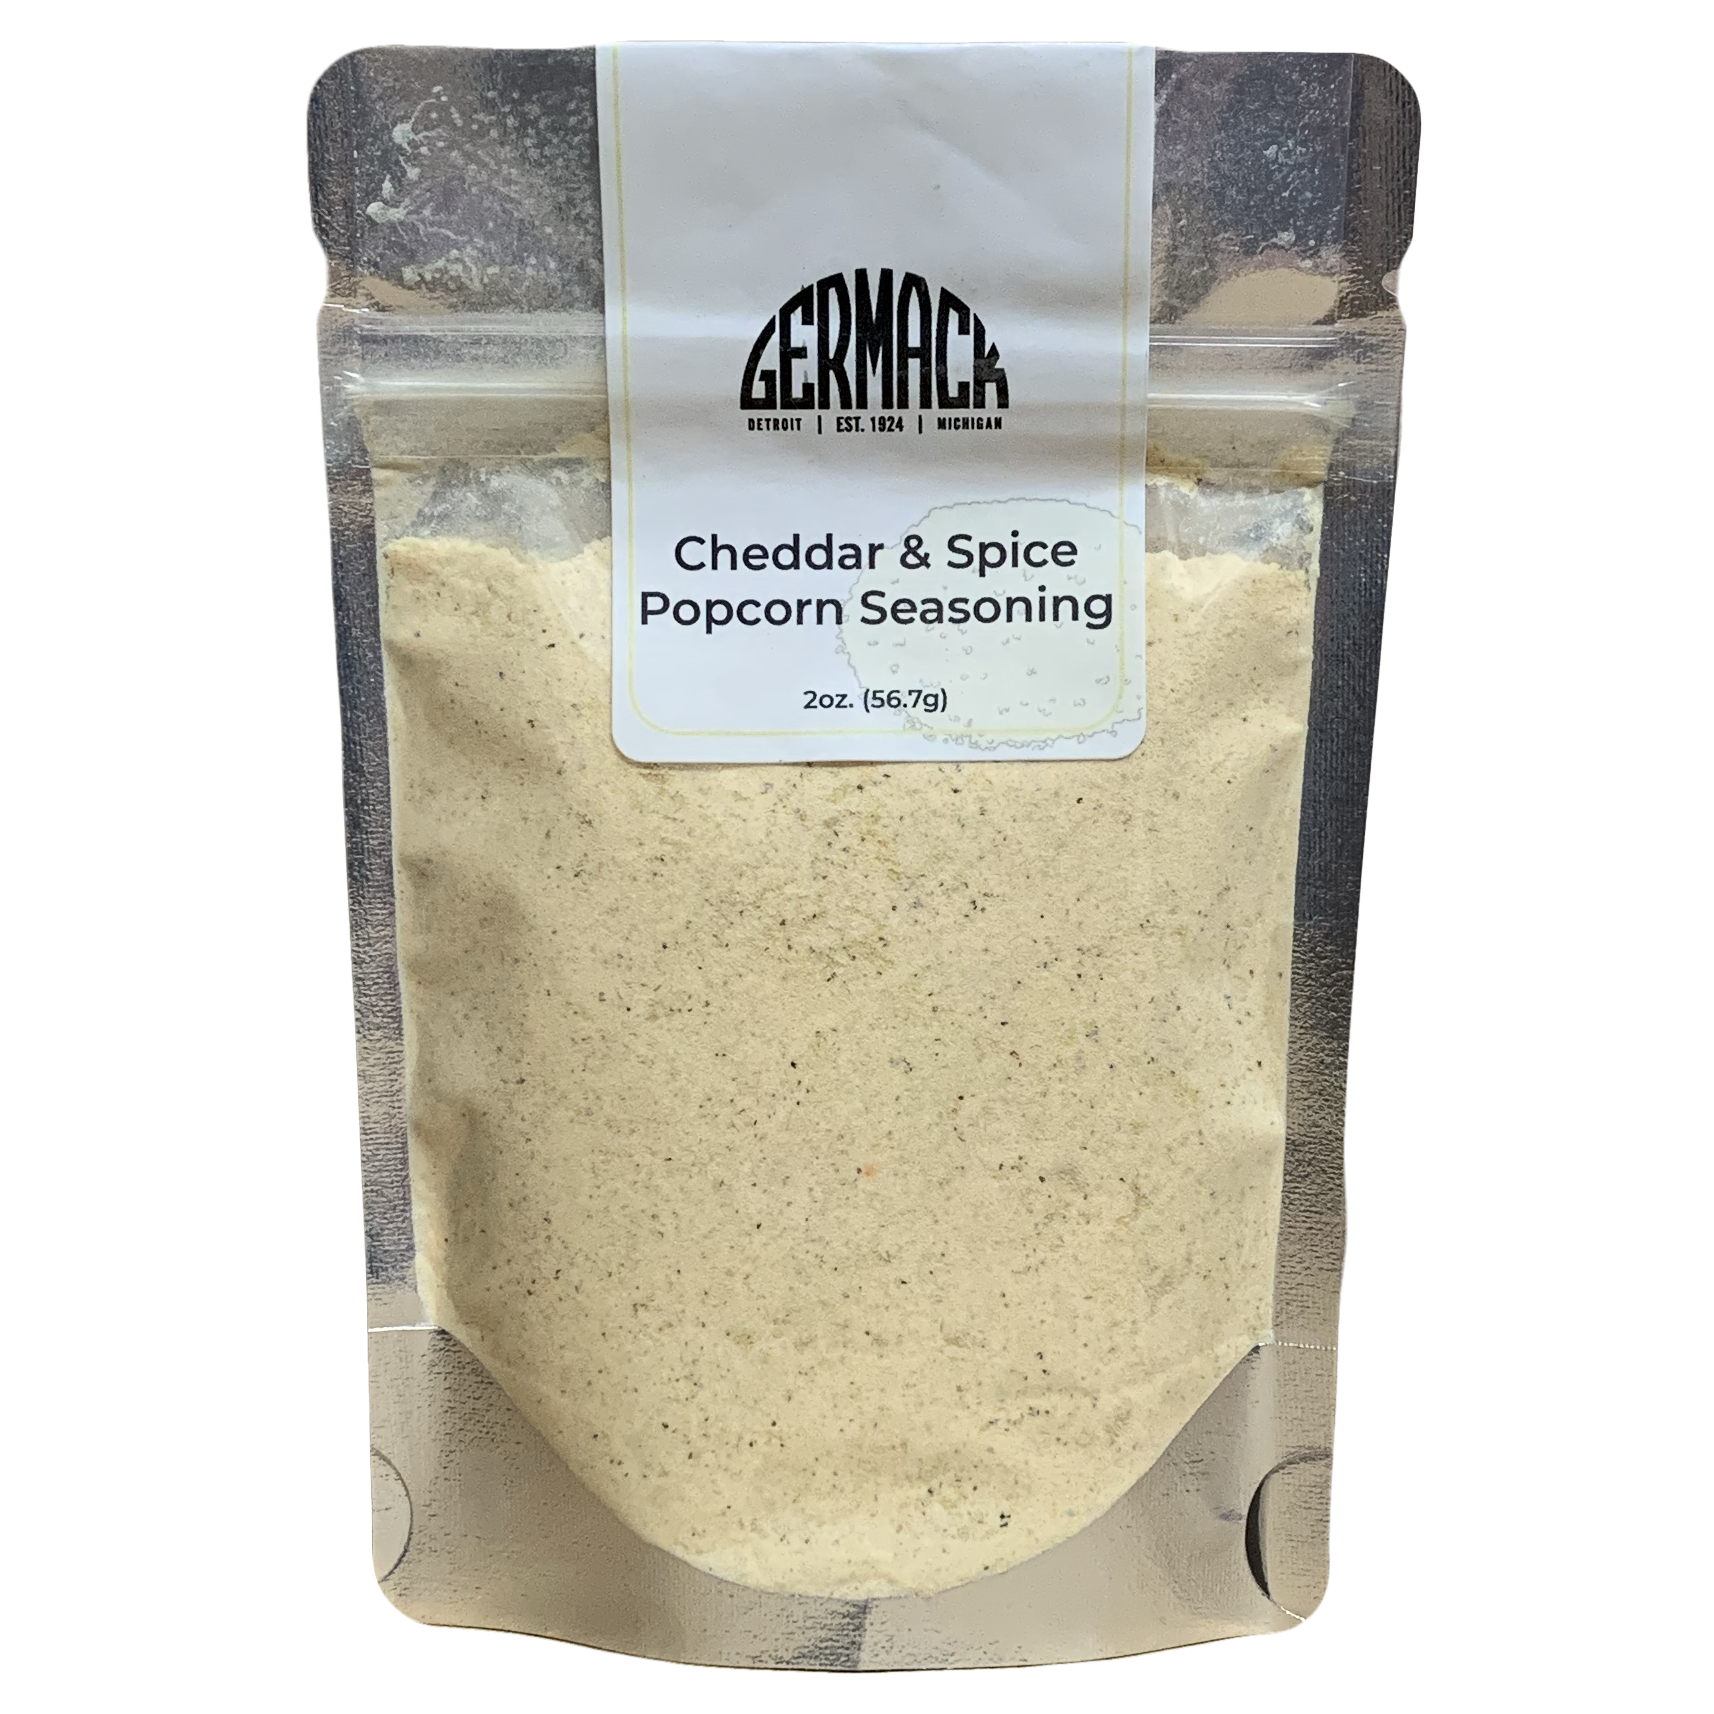 Picture Cheddar & Spice Popcorn Seasoning